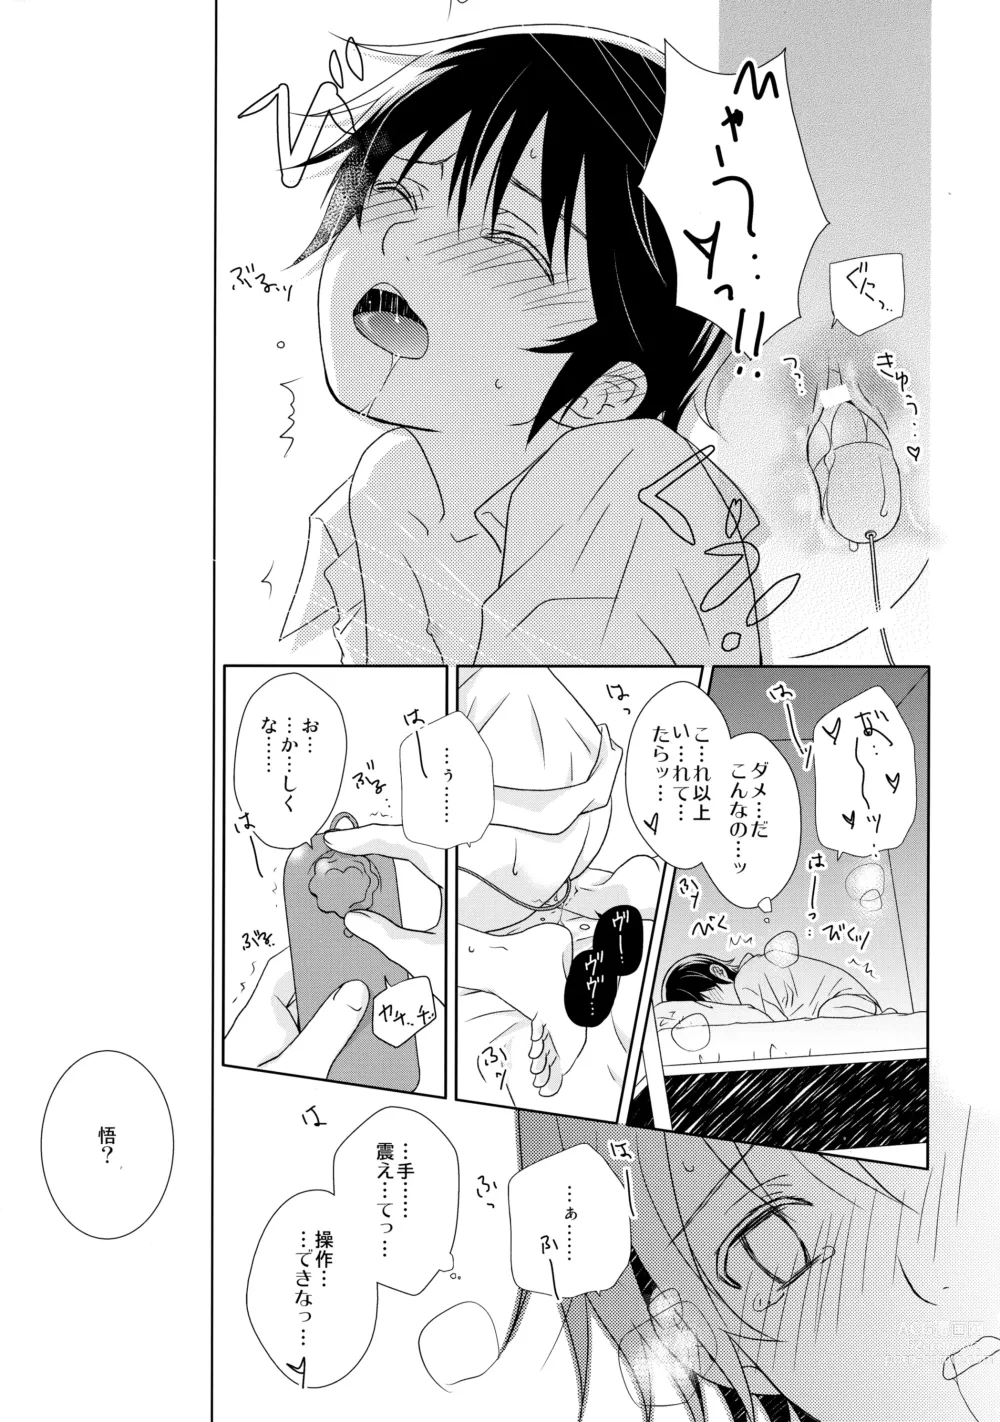 Page 4 of doujinshi Butterfield 8